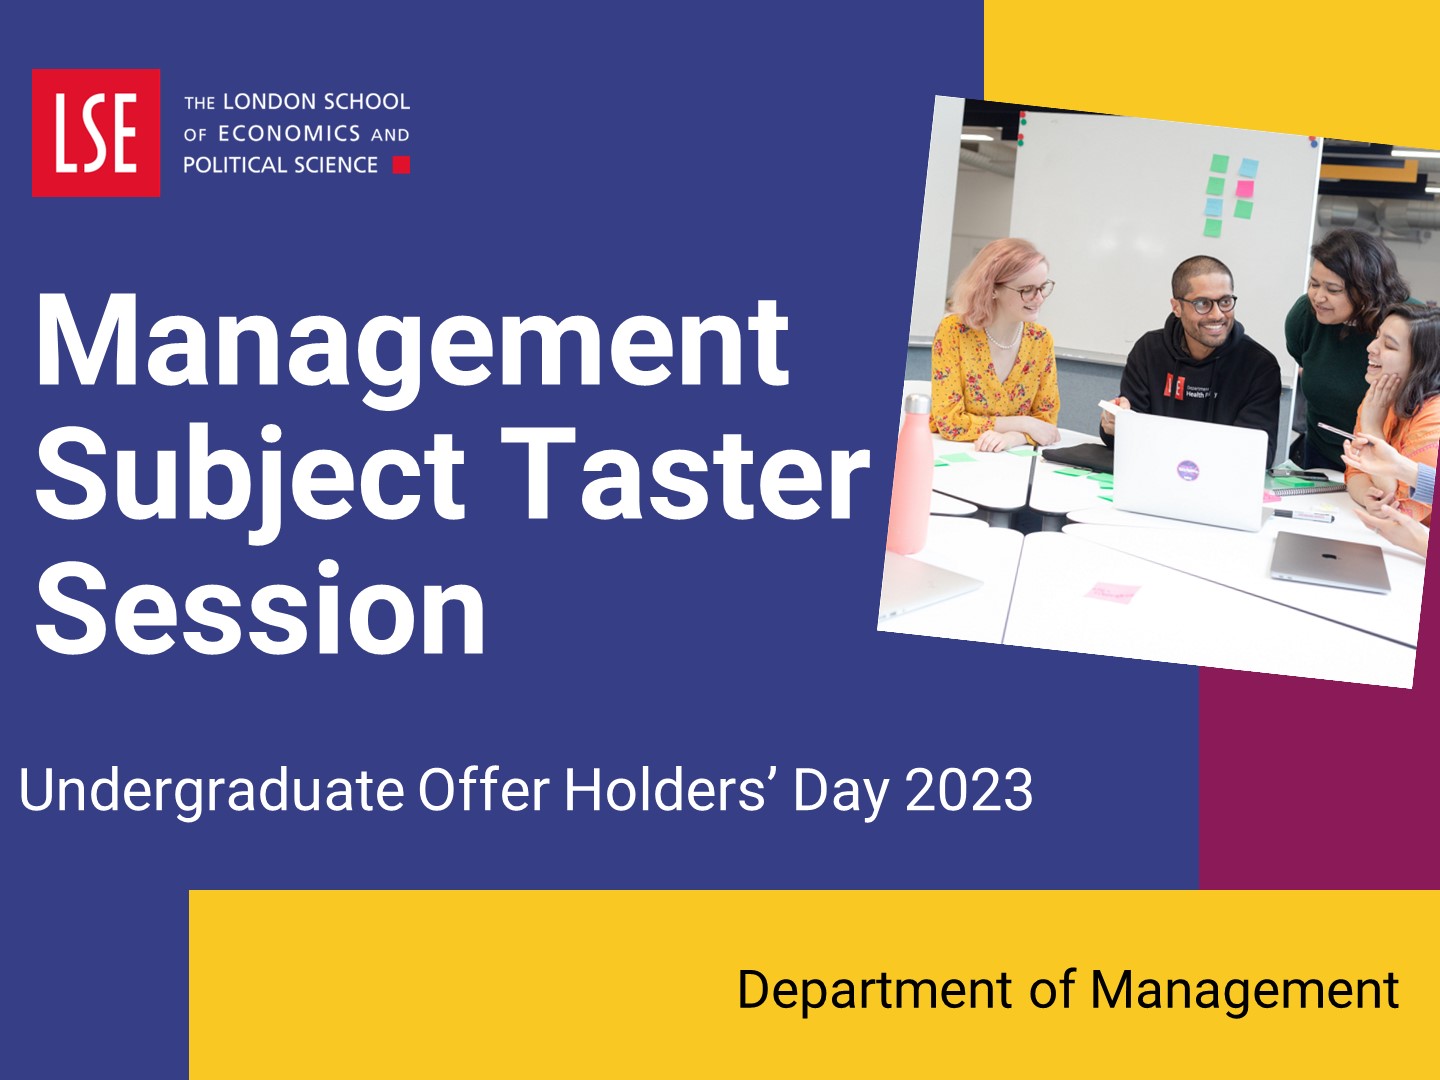 Watch the management subject taster session